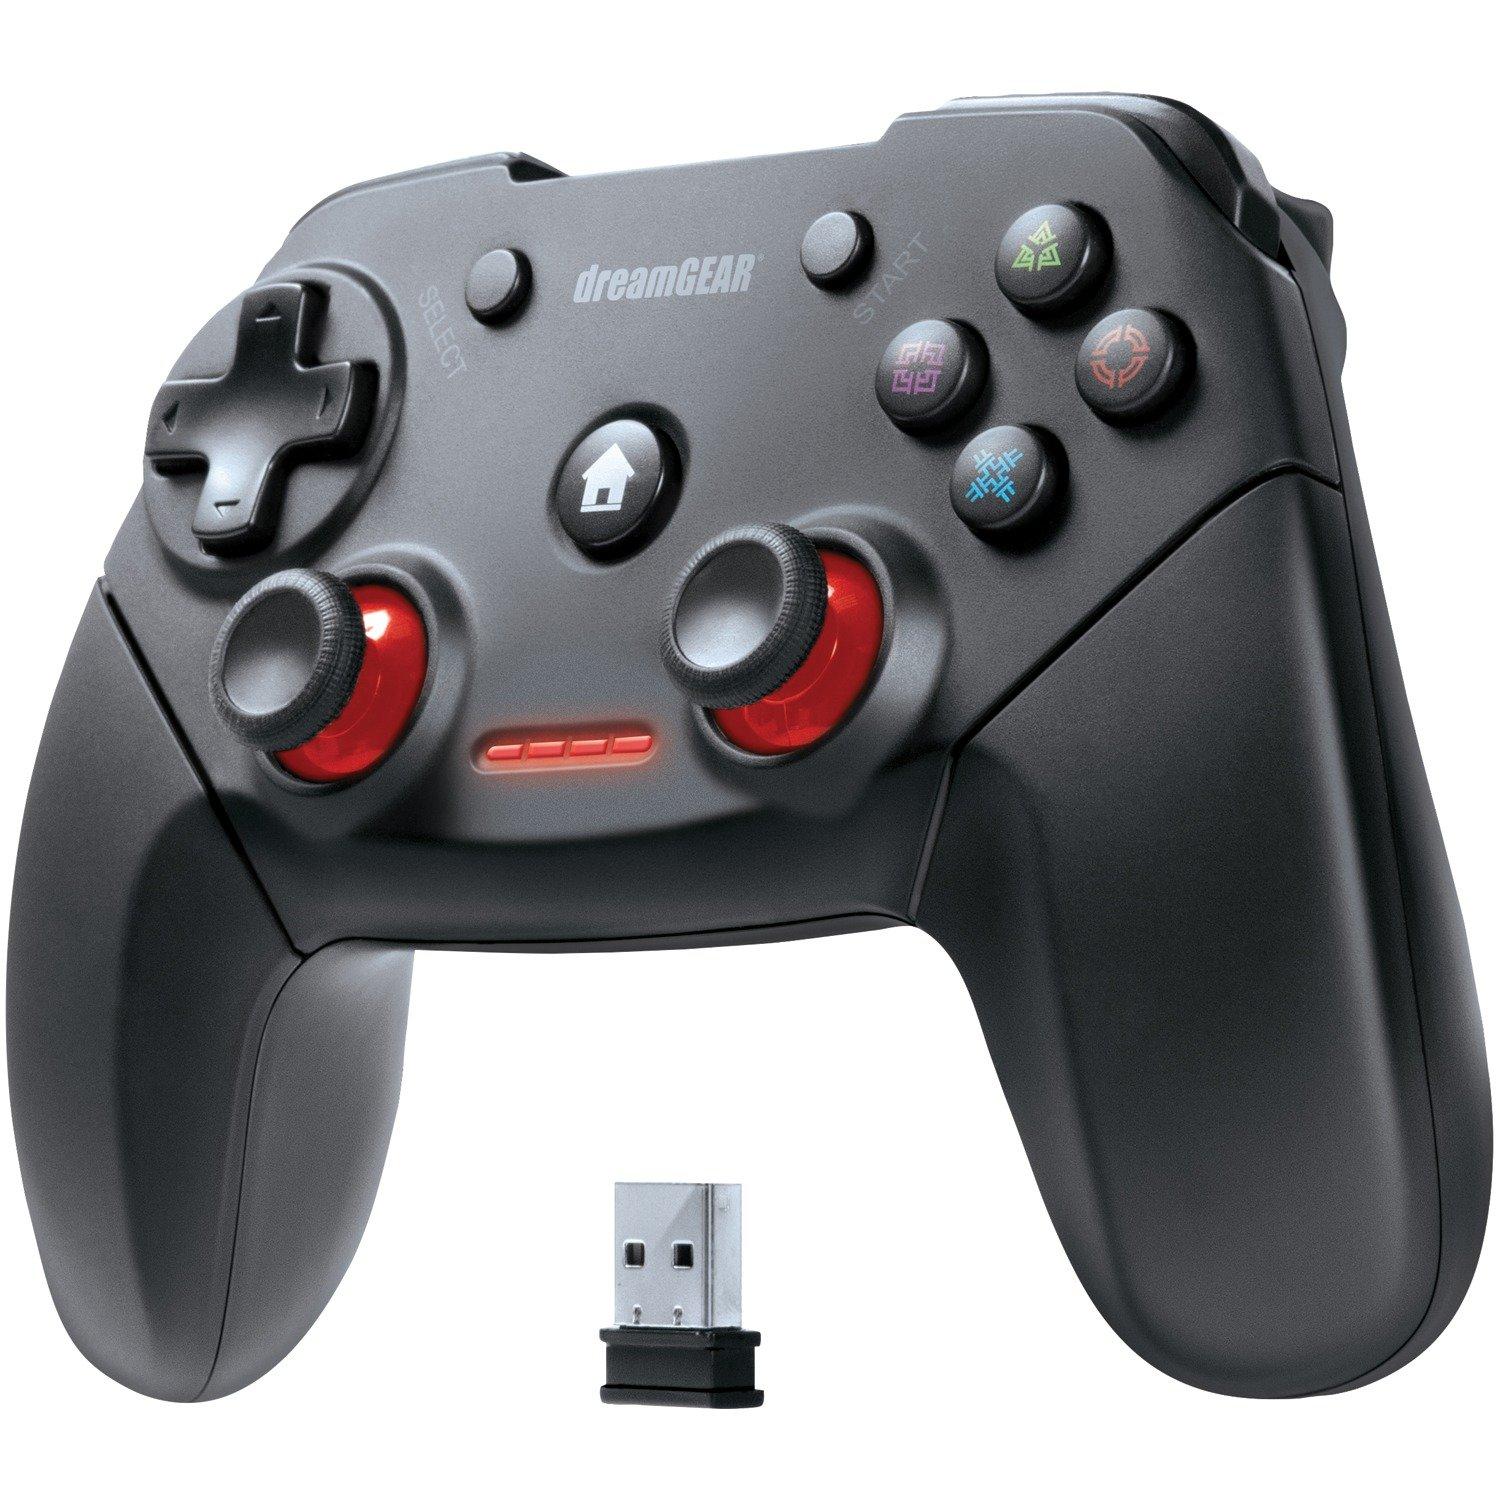 ropa interior desastre clima DreamGear Shadow Pro Wireless Controller for PlayStation 3 and PC | GameStop